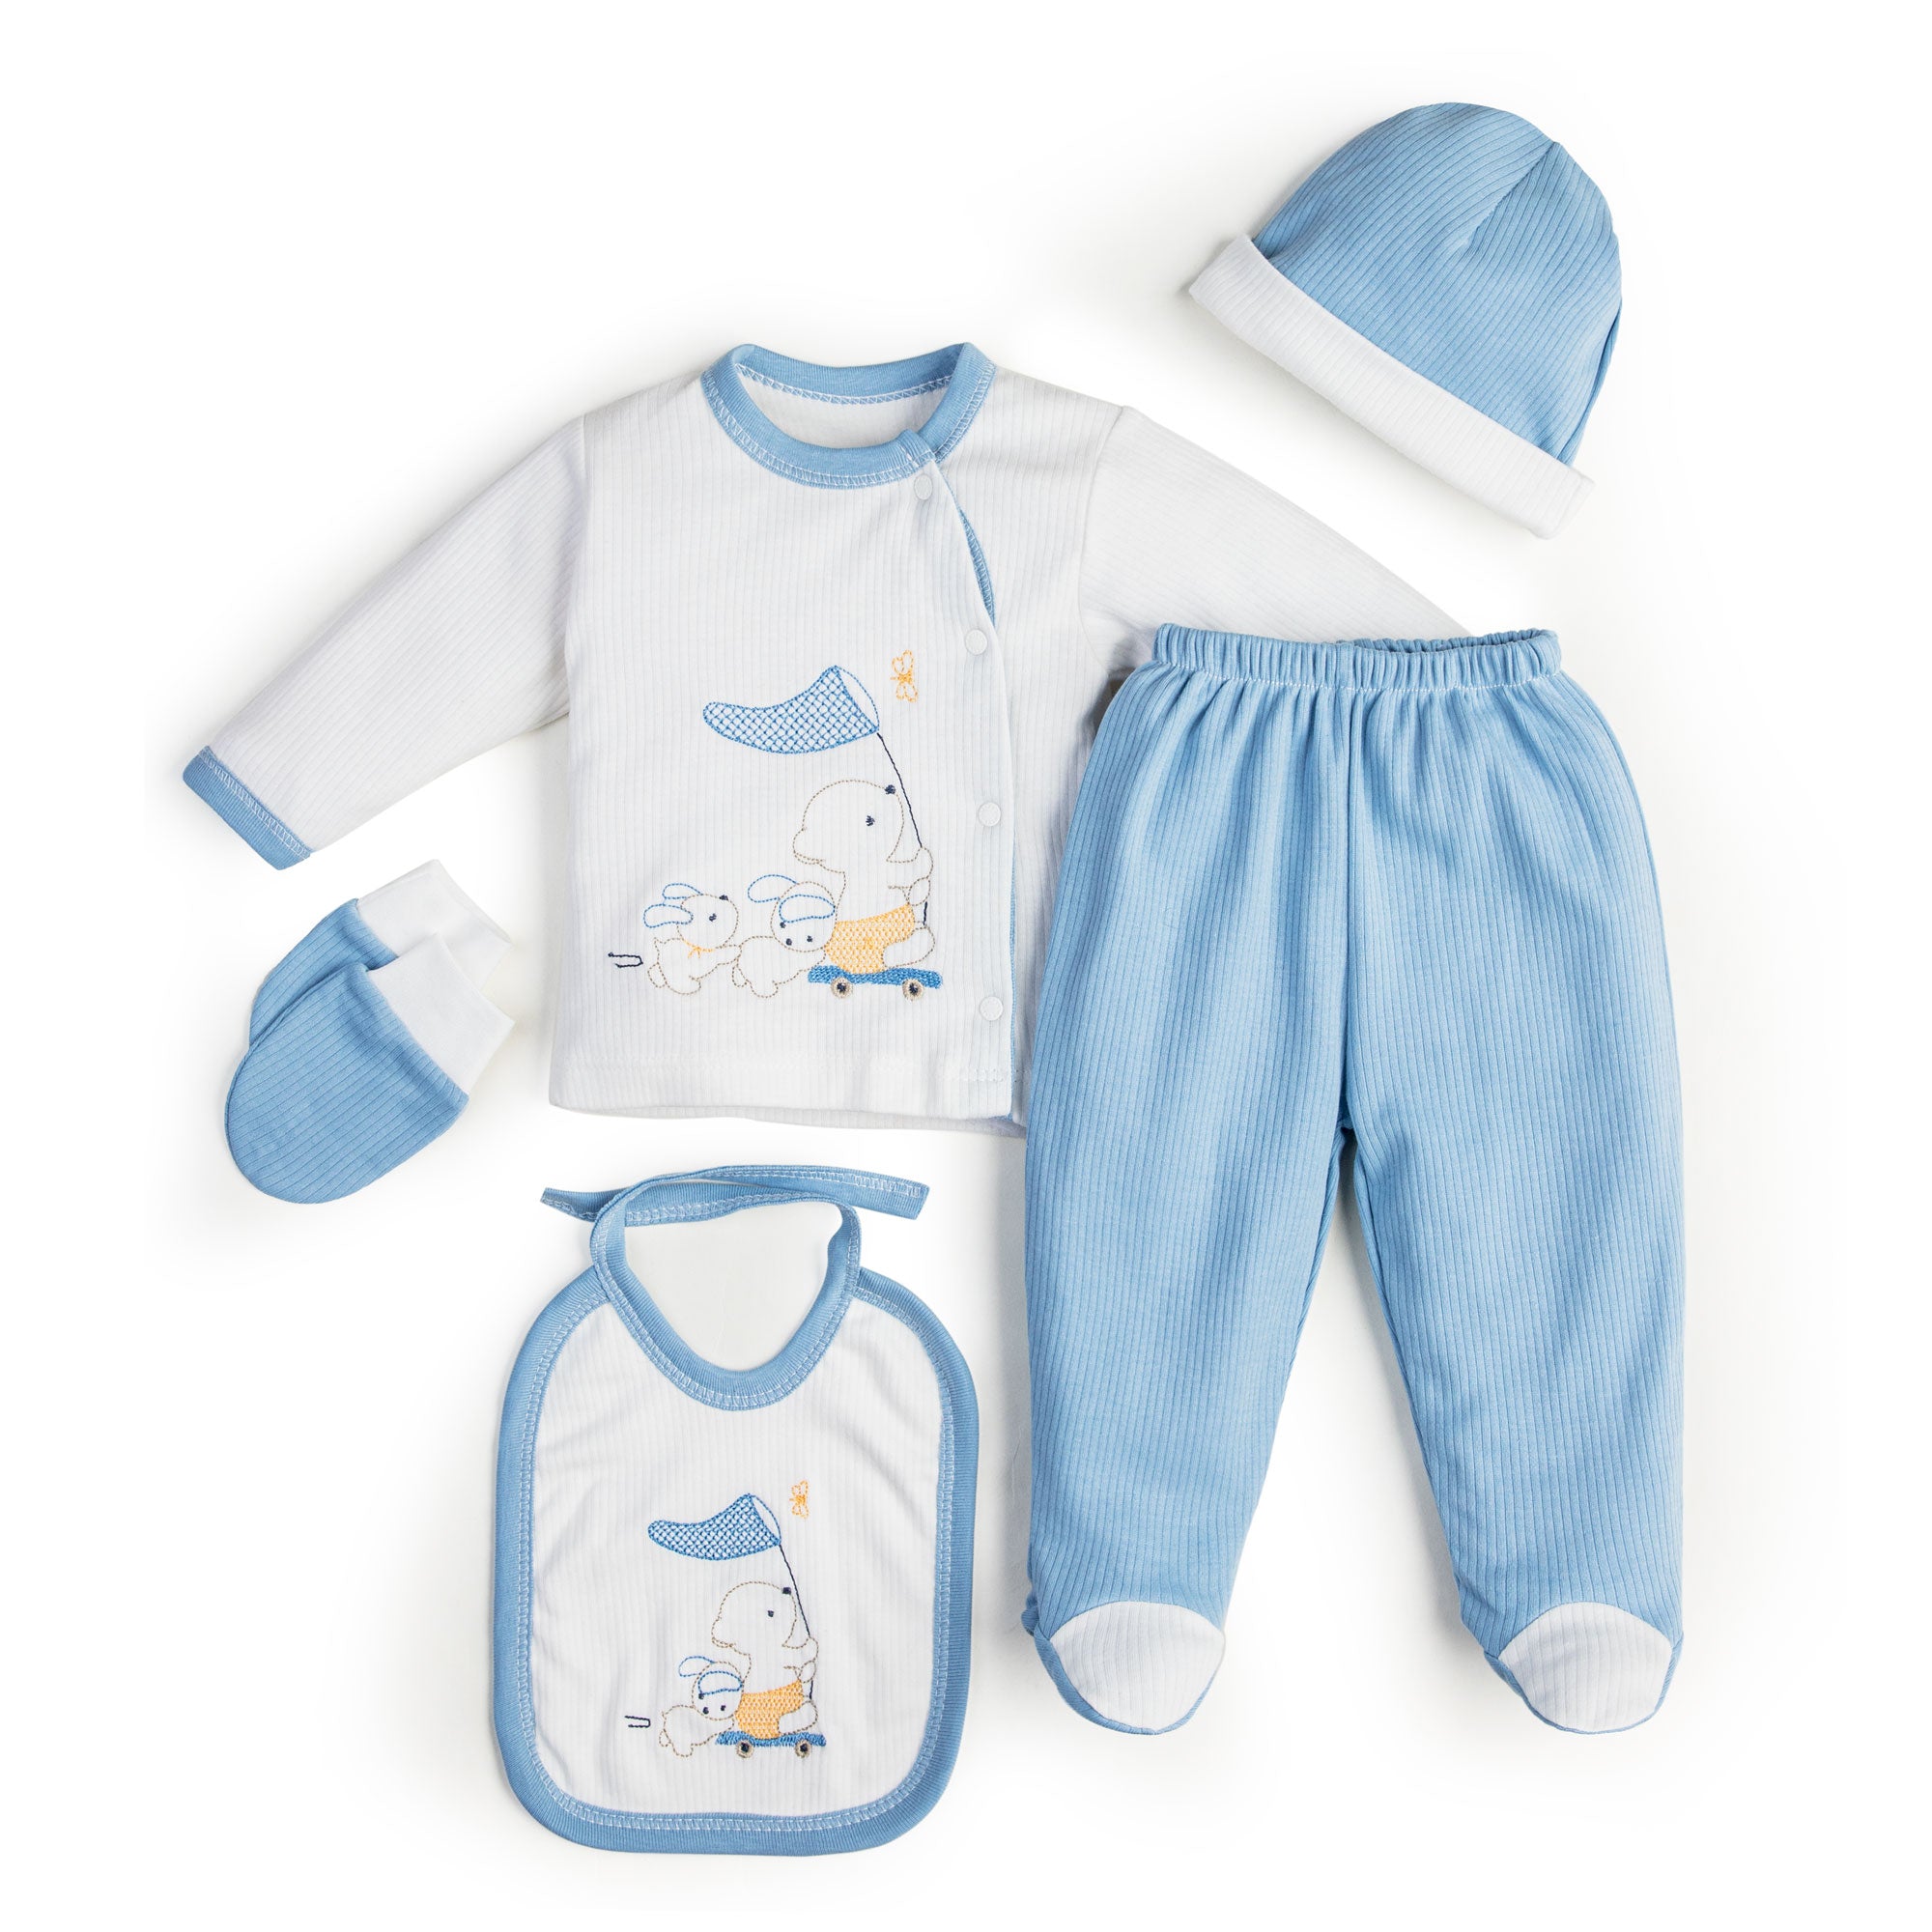 Baby 5-piece tee and footed pajama set